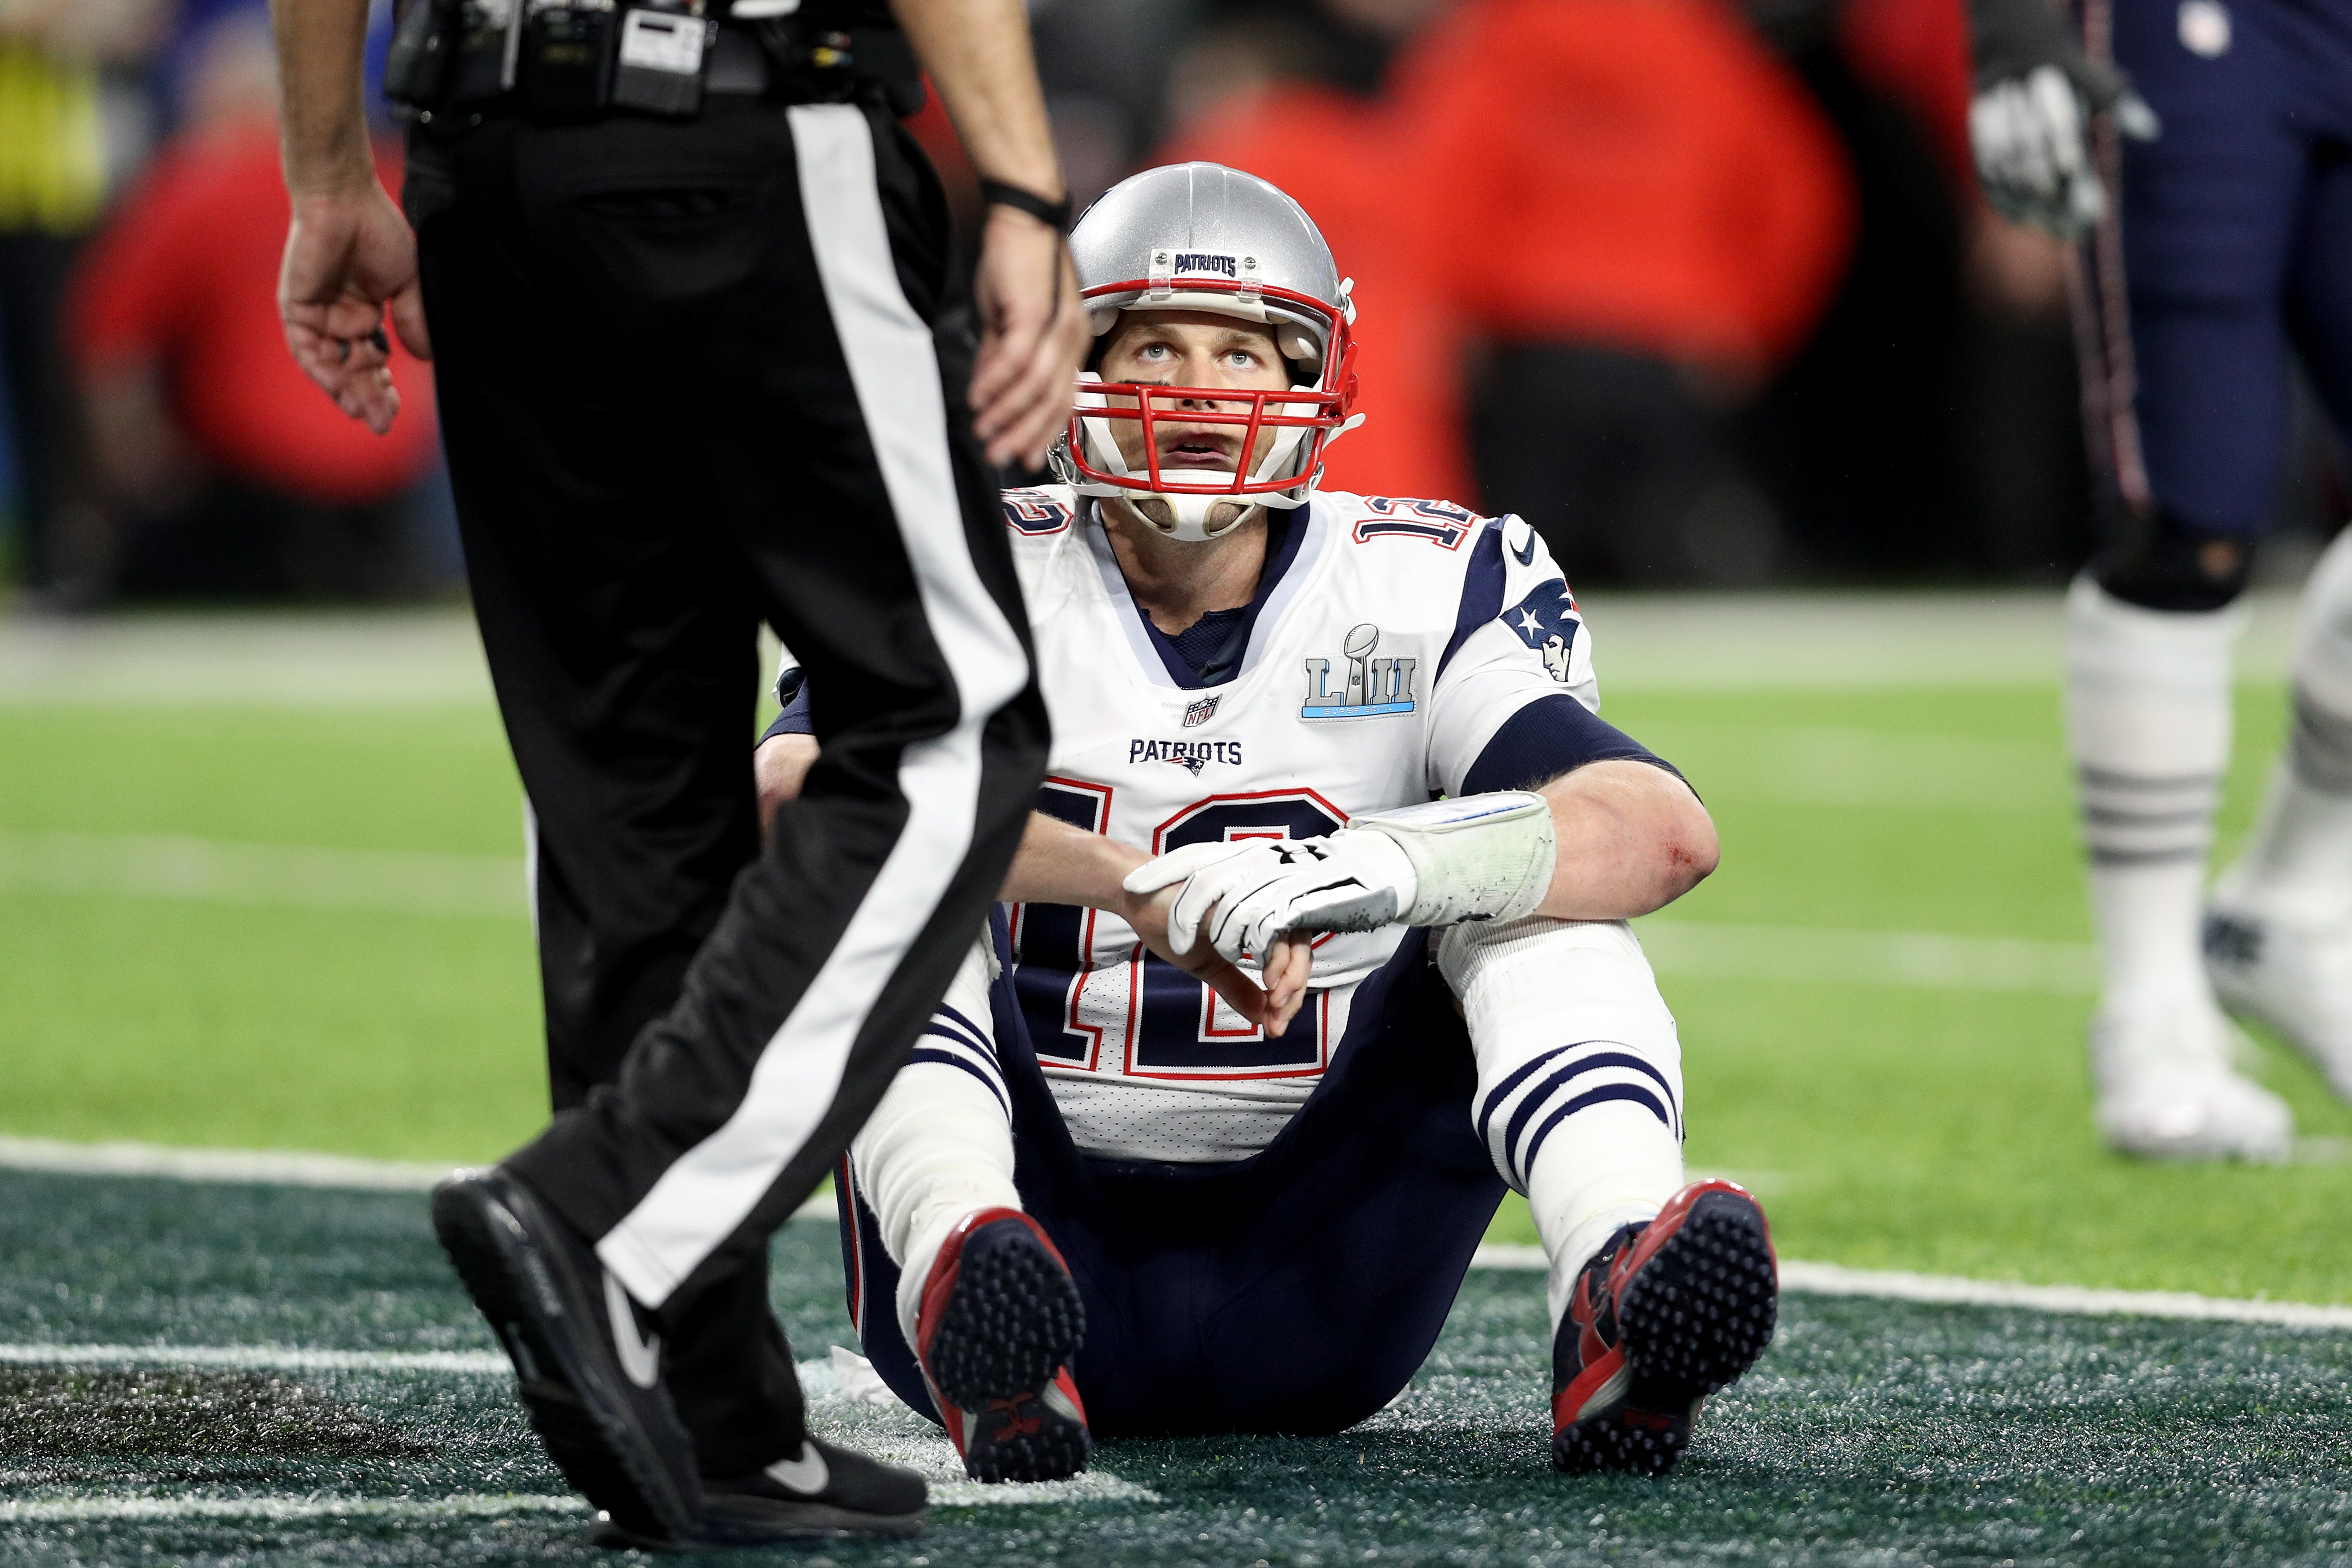 A Downtrodden Tom Brady Shows No Signs of Stopping